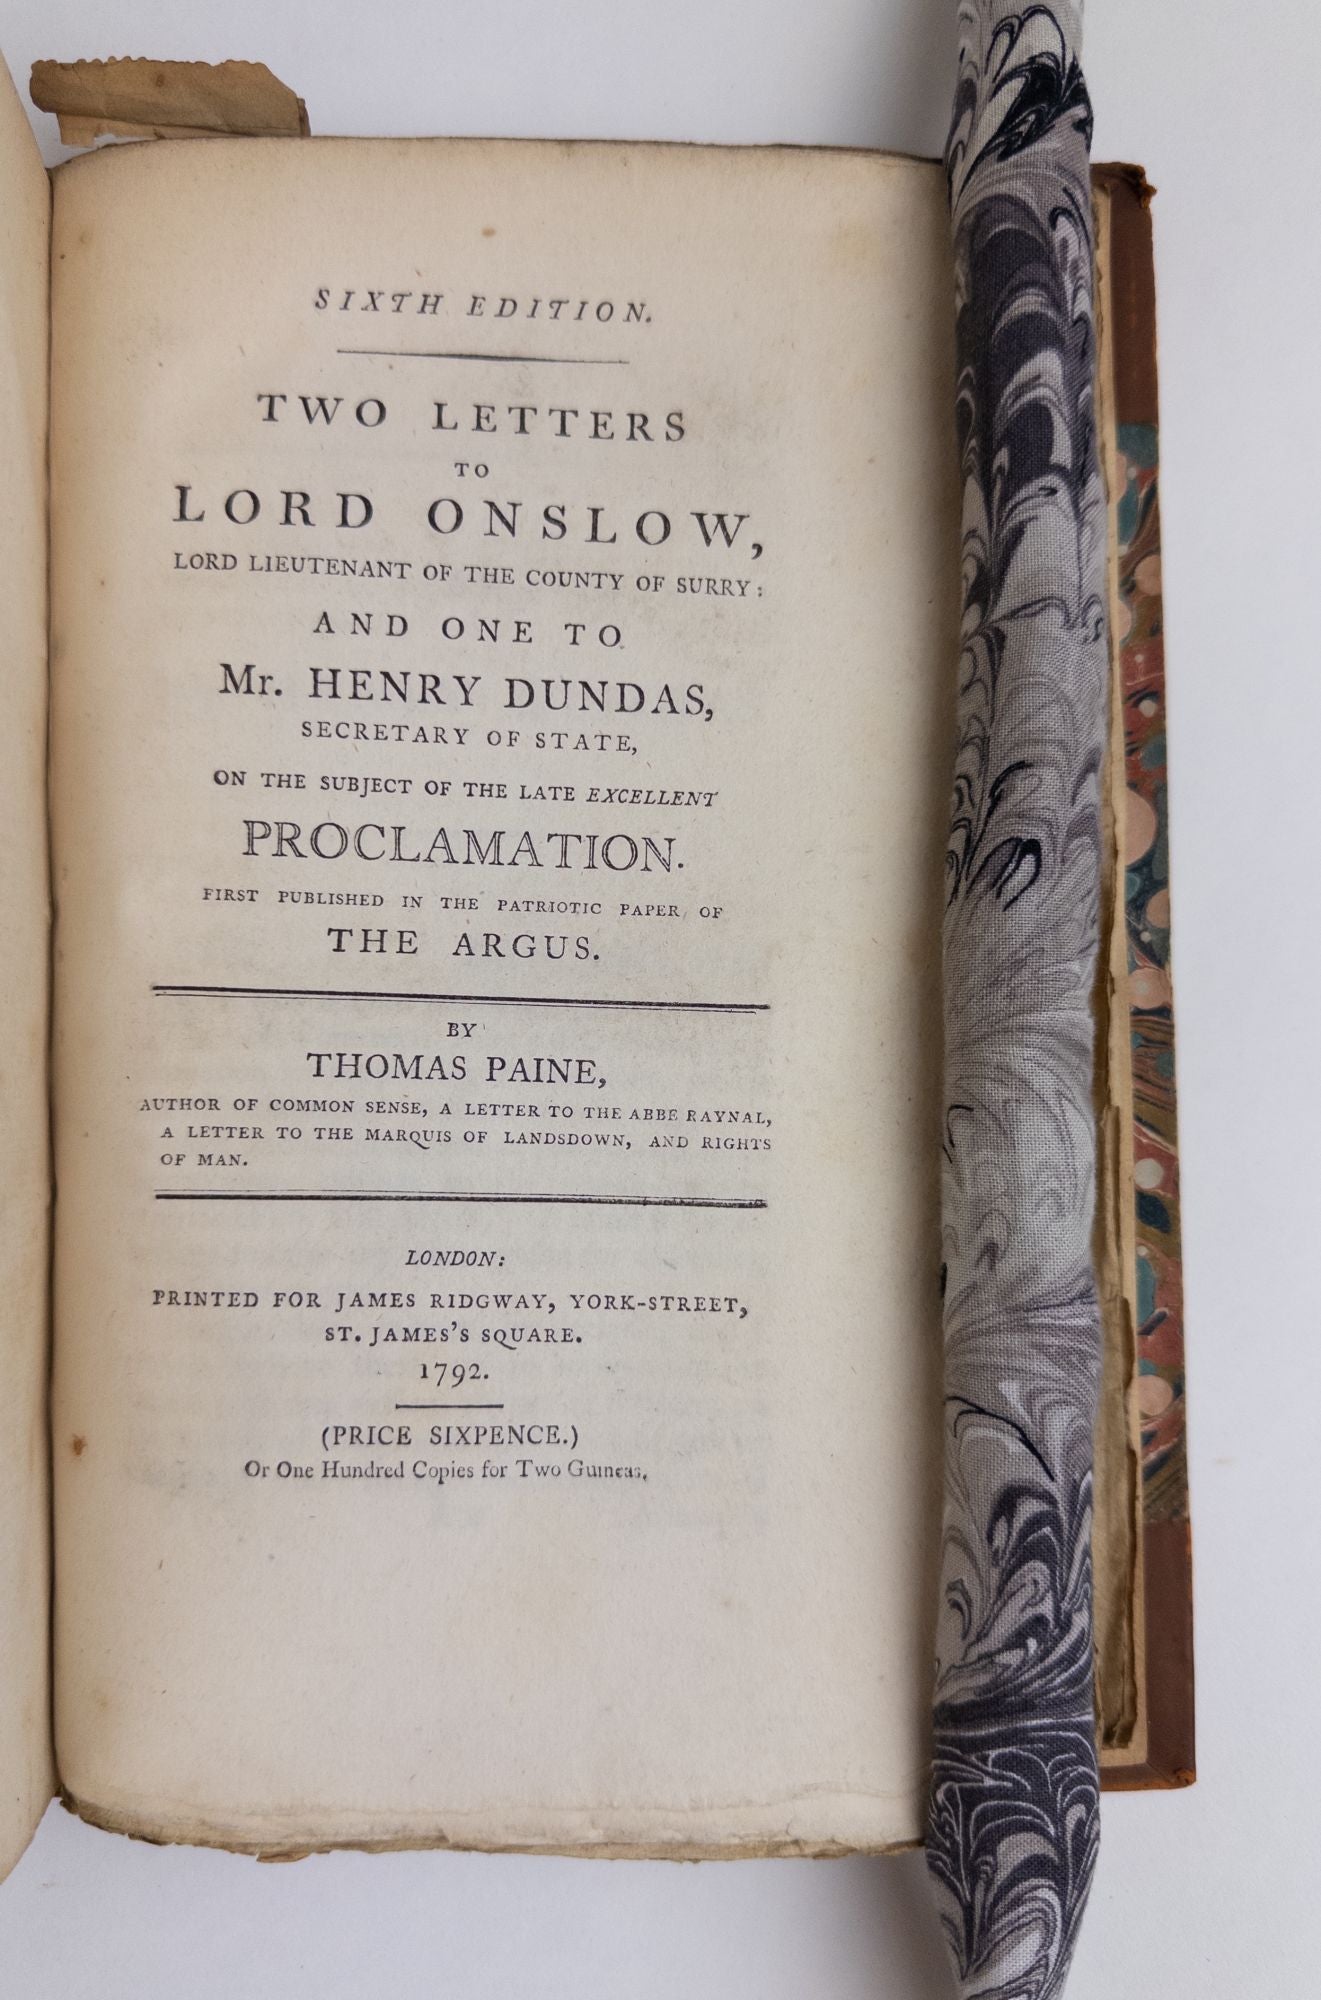 Product Image for RIGHTS OF MAN [Bound with] RIGHTS OF MAN PART THE SECOND [Bound with TWO LETTERS TO LORD ONSLOW [Bound with] LETTER ADDRESSED TO THE ADDRESSERS ON THE LATE PROCLAMATION